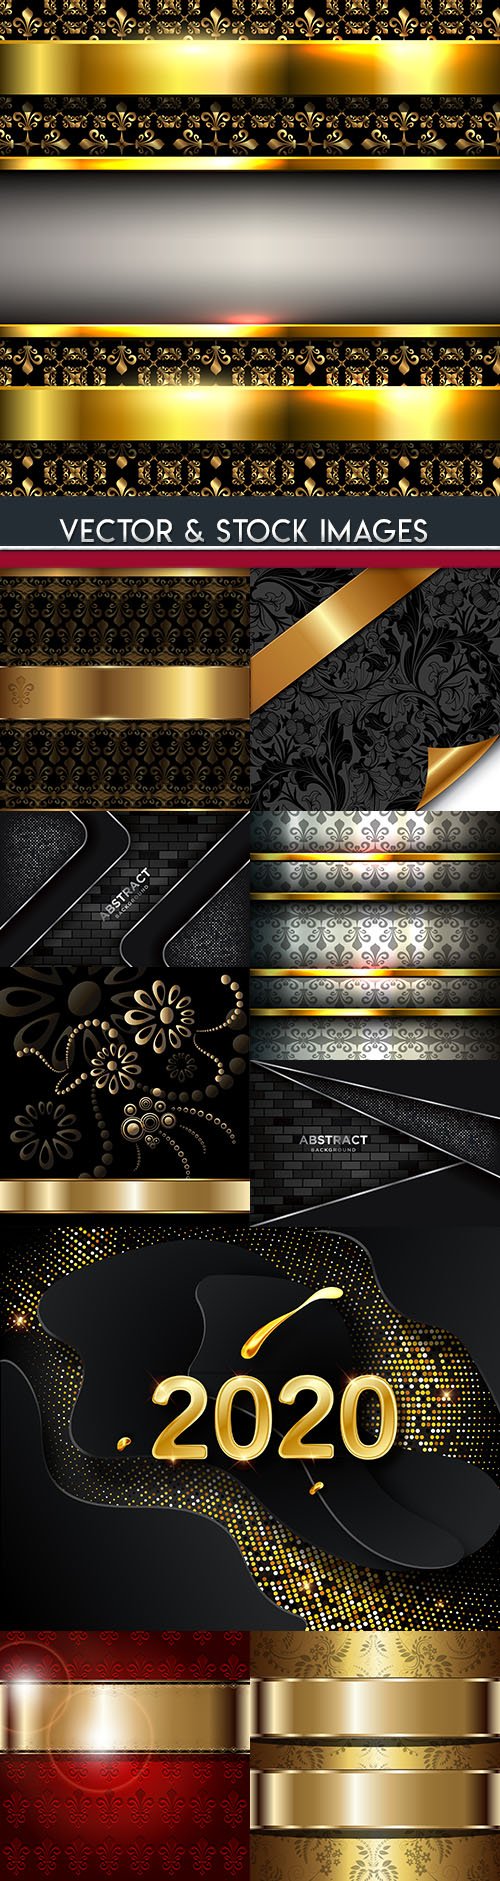 Abstract golden metallic and floral decor background